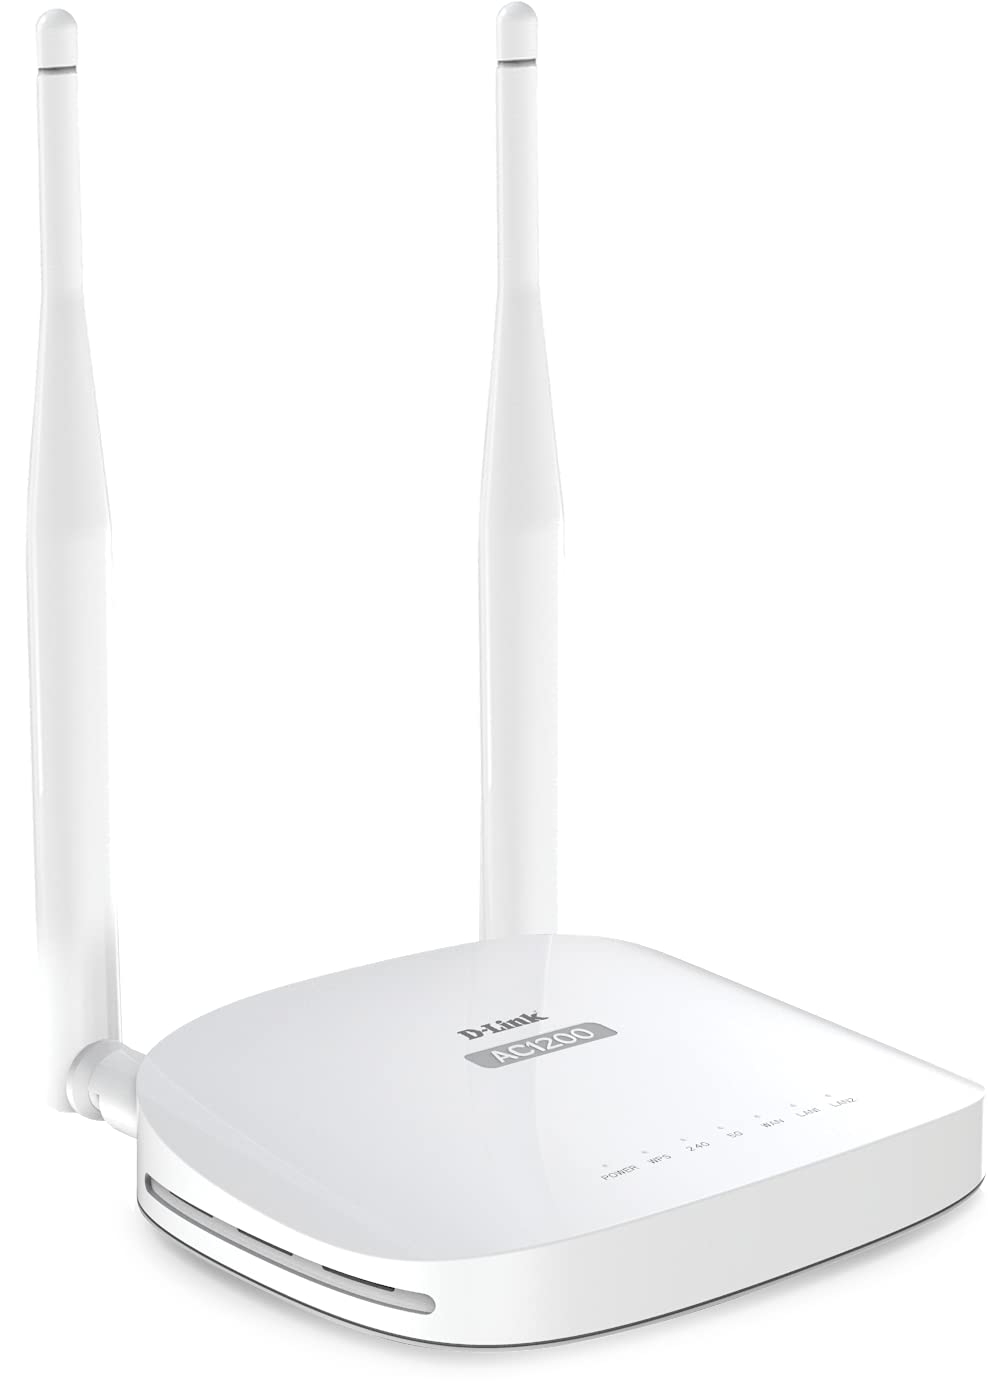 D-Link AC1200 DIR-811 Dual Band Wi-Fi 867 Mbps/5 GHz + 300 Mbps/2.4 GHz | 2 Fast Ethernet Ports, 2 Antennas | Access Point Mode, WPS Protected